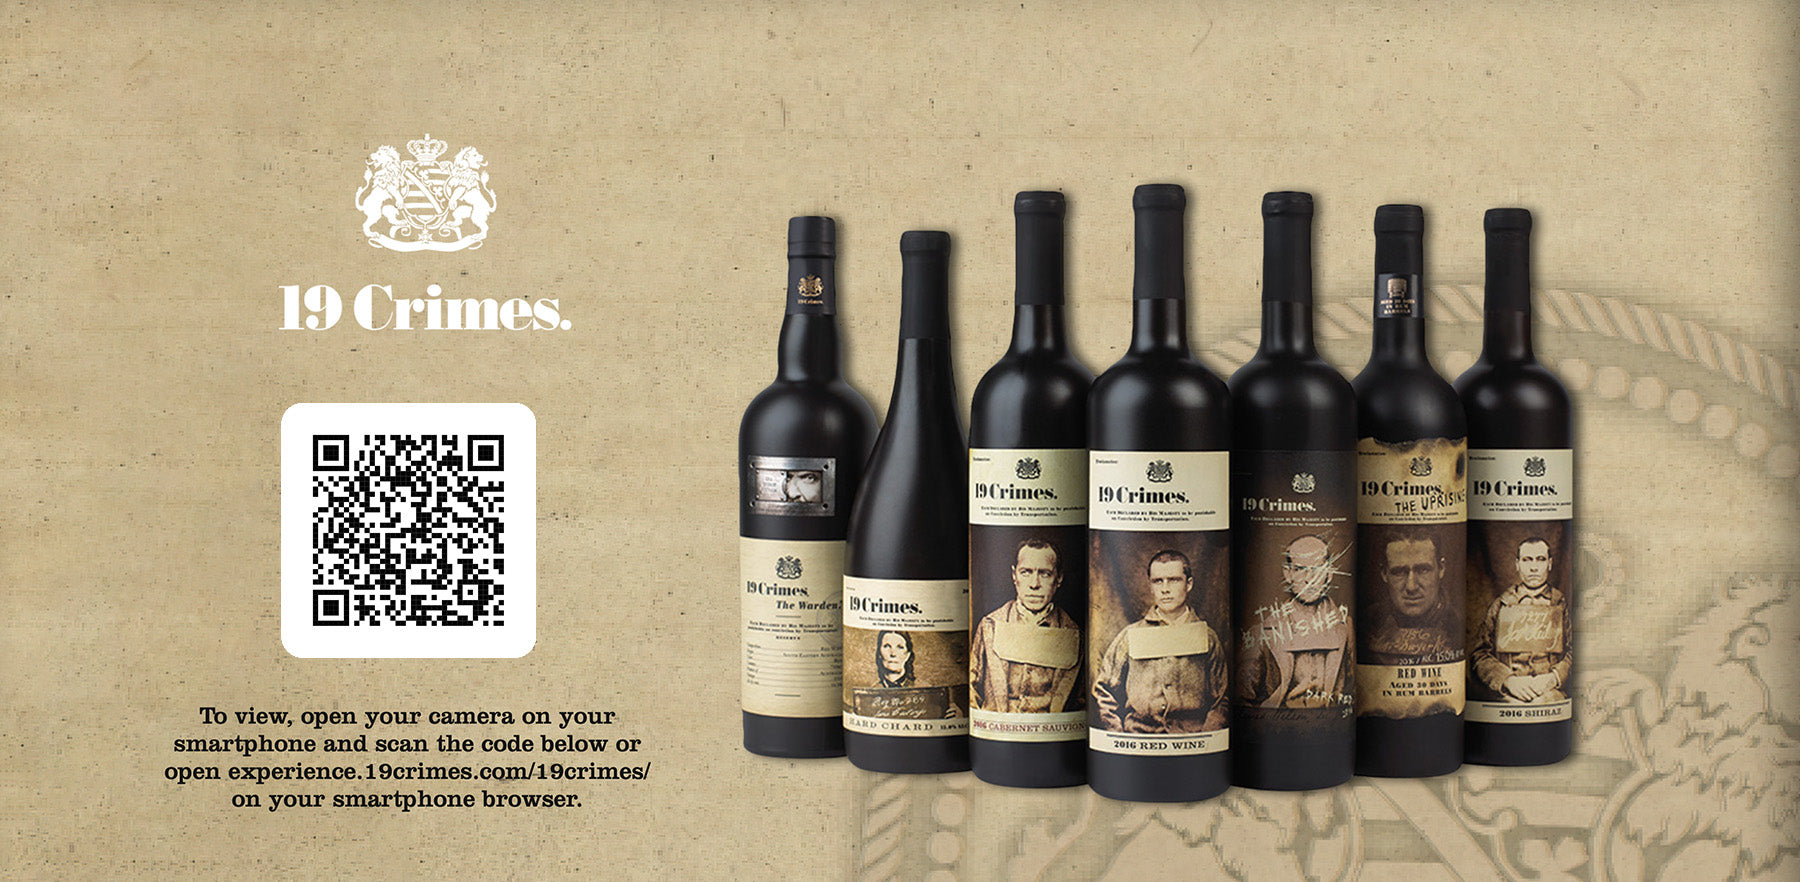 go to experience.19crimes.com/redblend on your smartphone browser